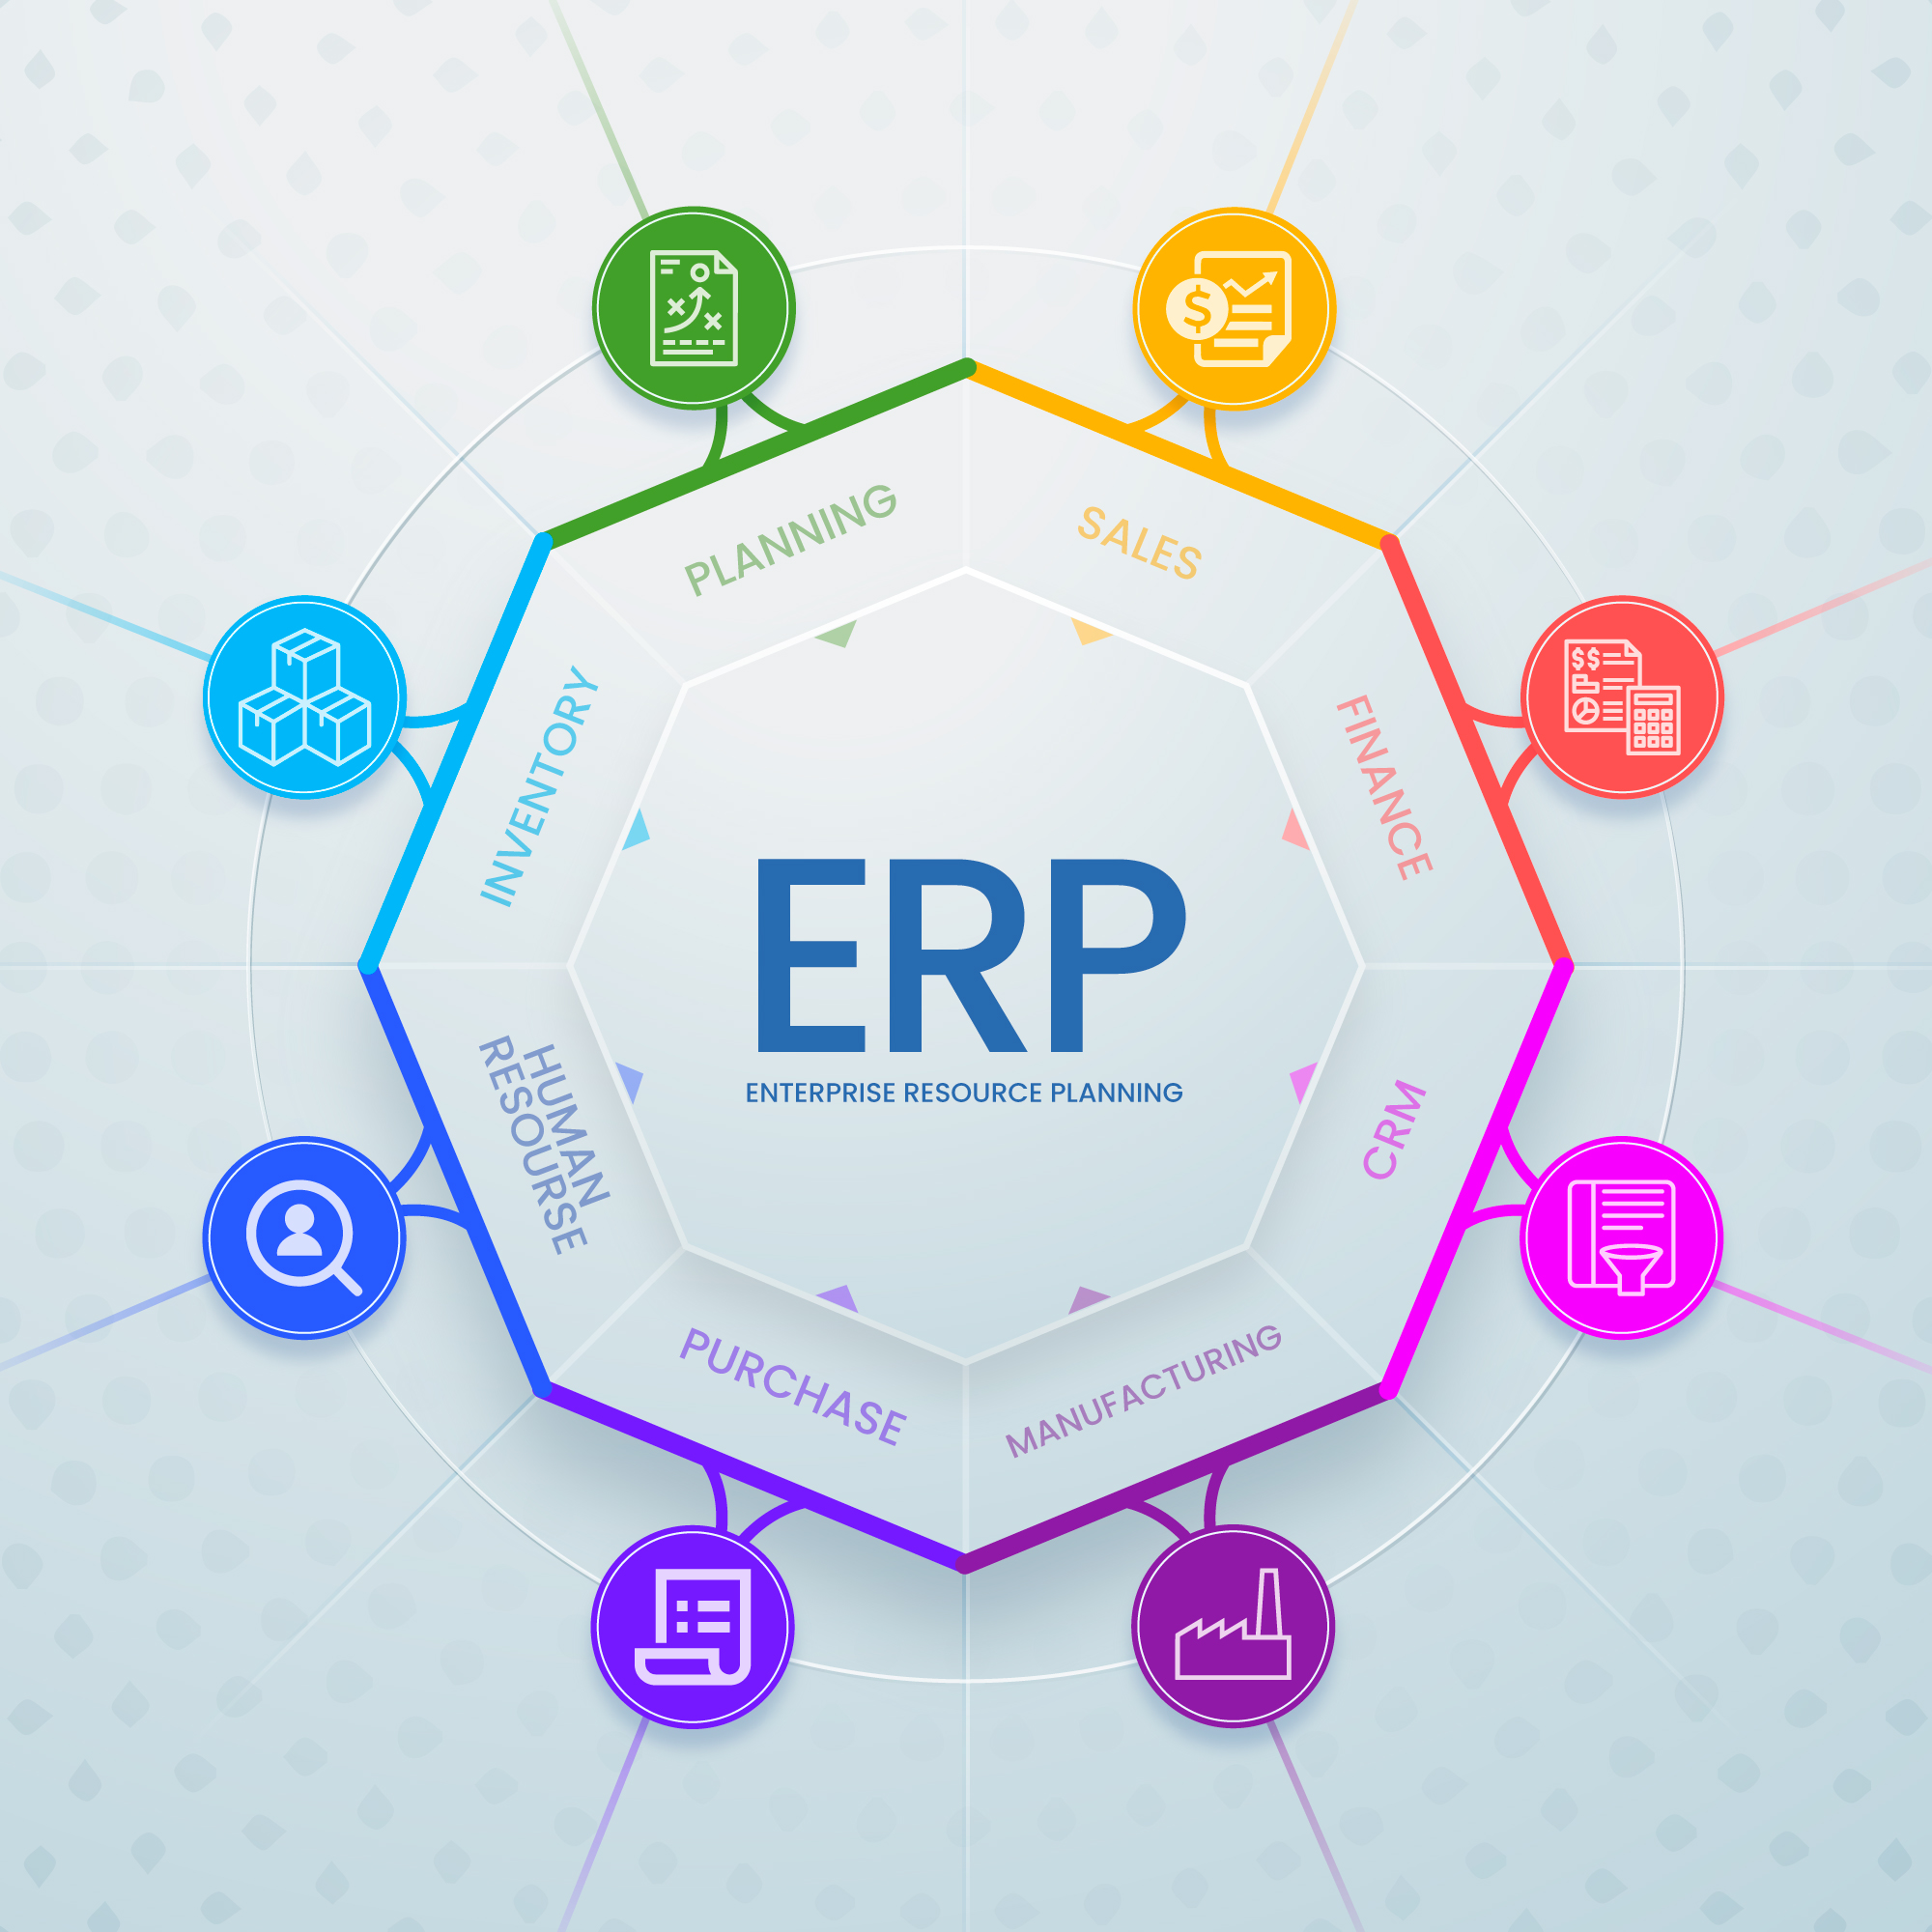 6 Best ERP Systems For Small Businesses